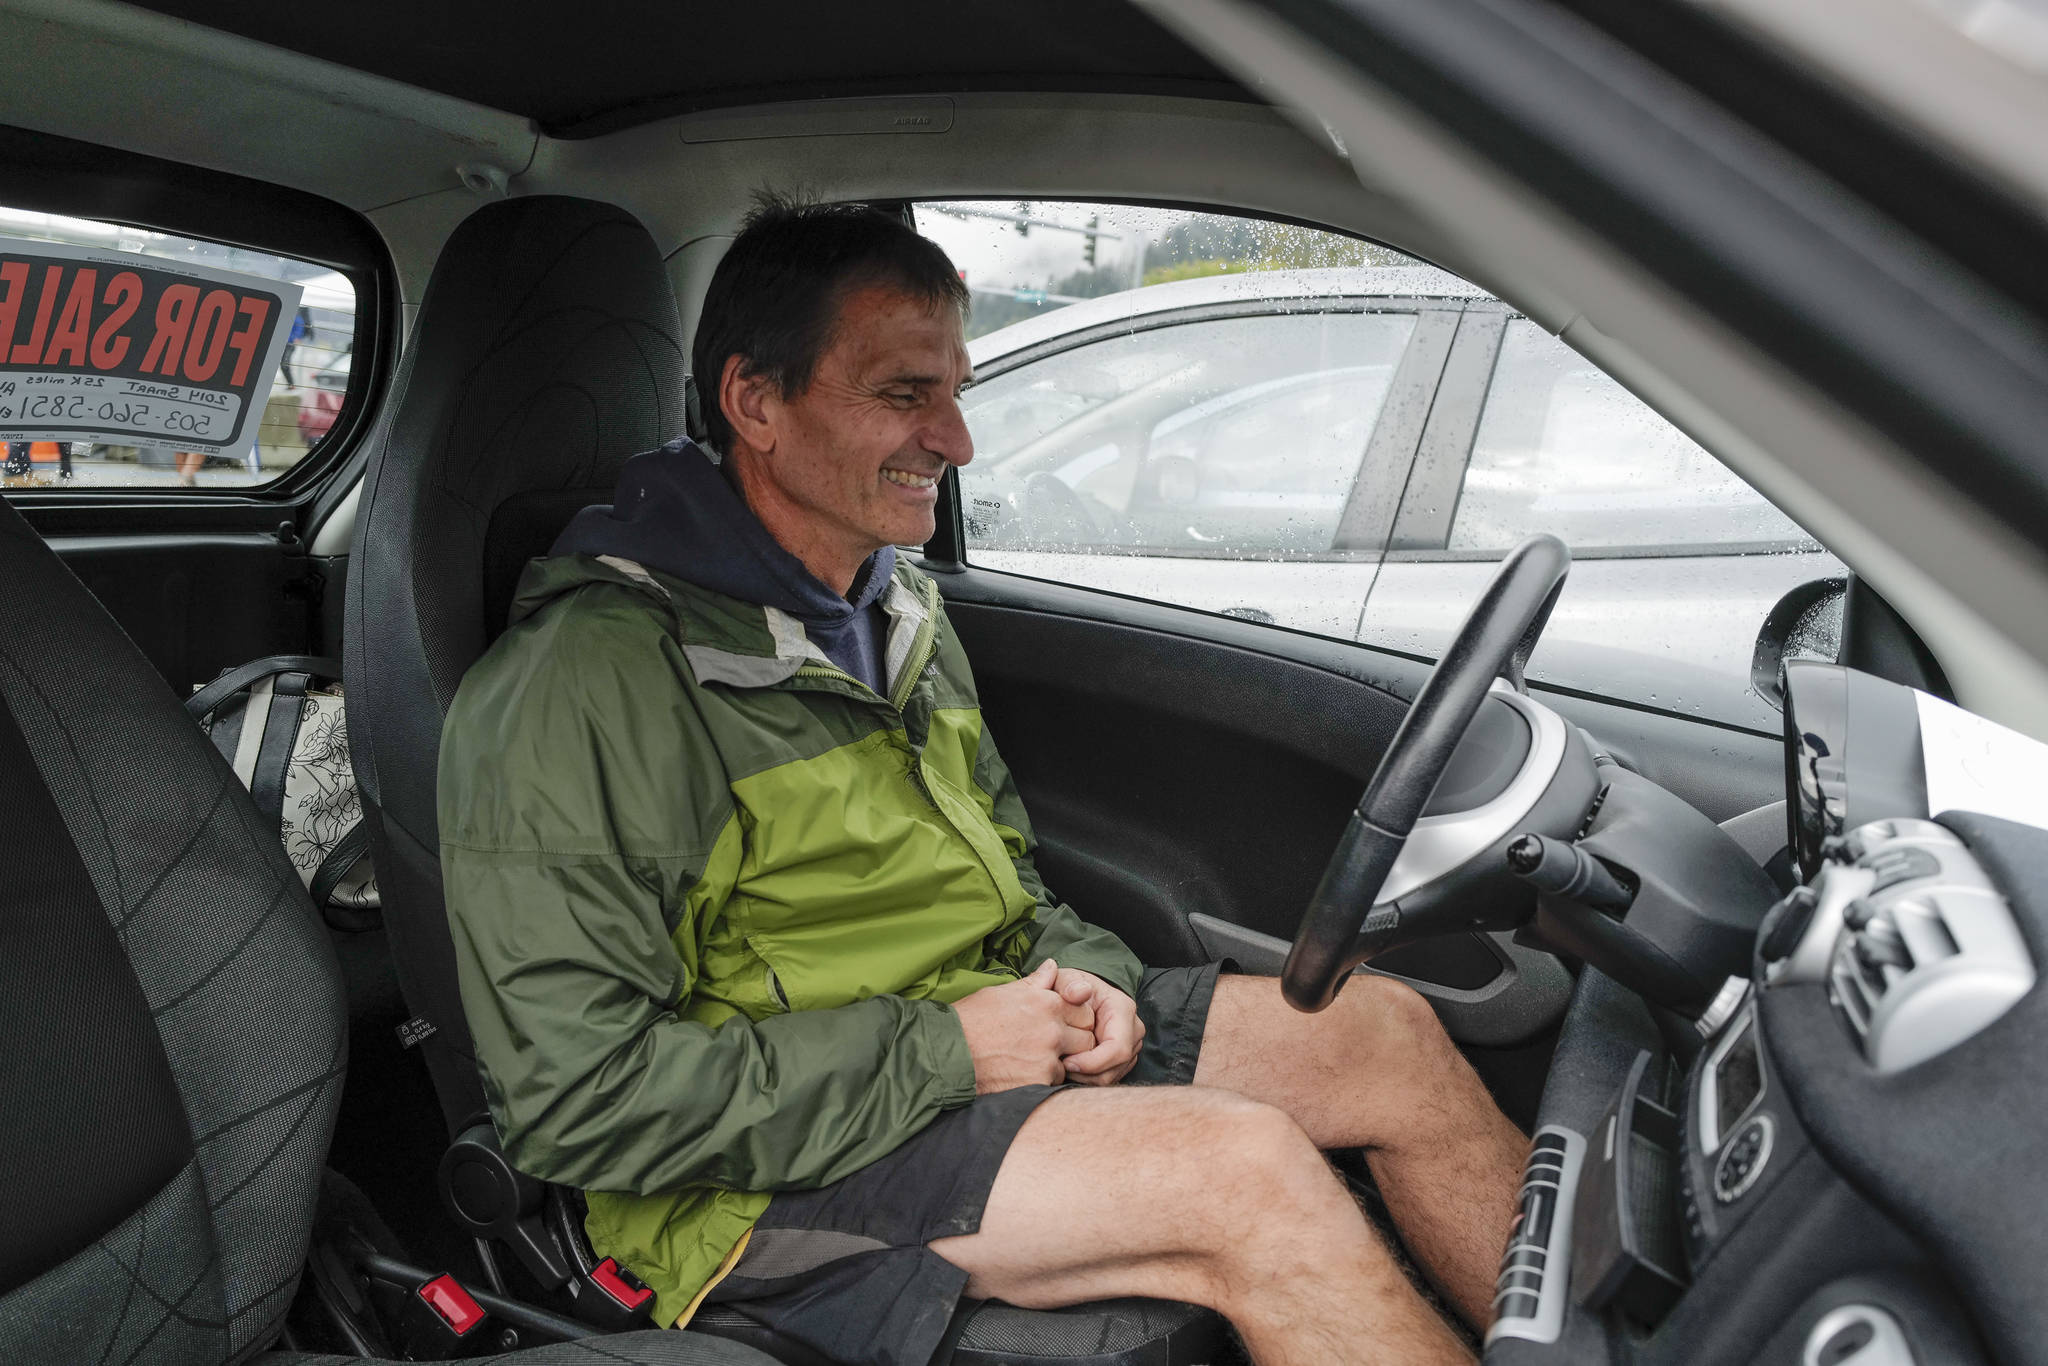 Arnold Liebelt tries out an electric Smart Car for size as Juneau residents meet for the Sixth Annual Electric Vehicle Juneau Roundup on Saturday, Sept. 21, 2019. (Michael Penn | Juneau Empire)